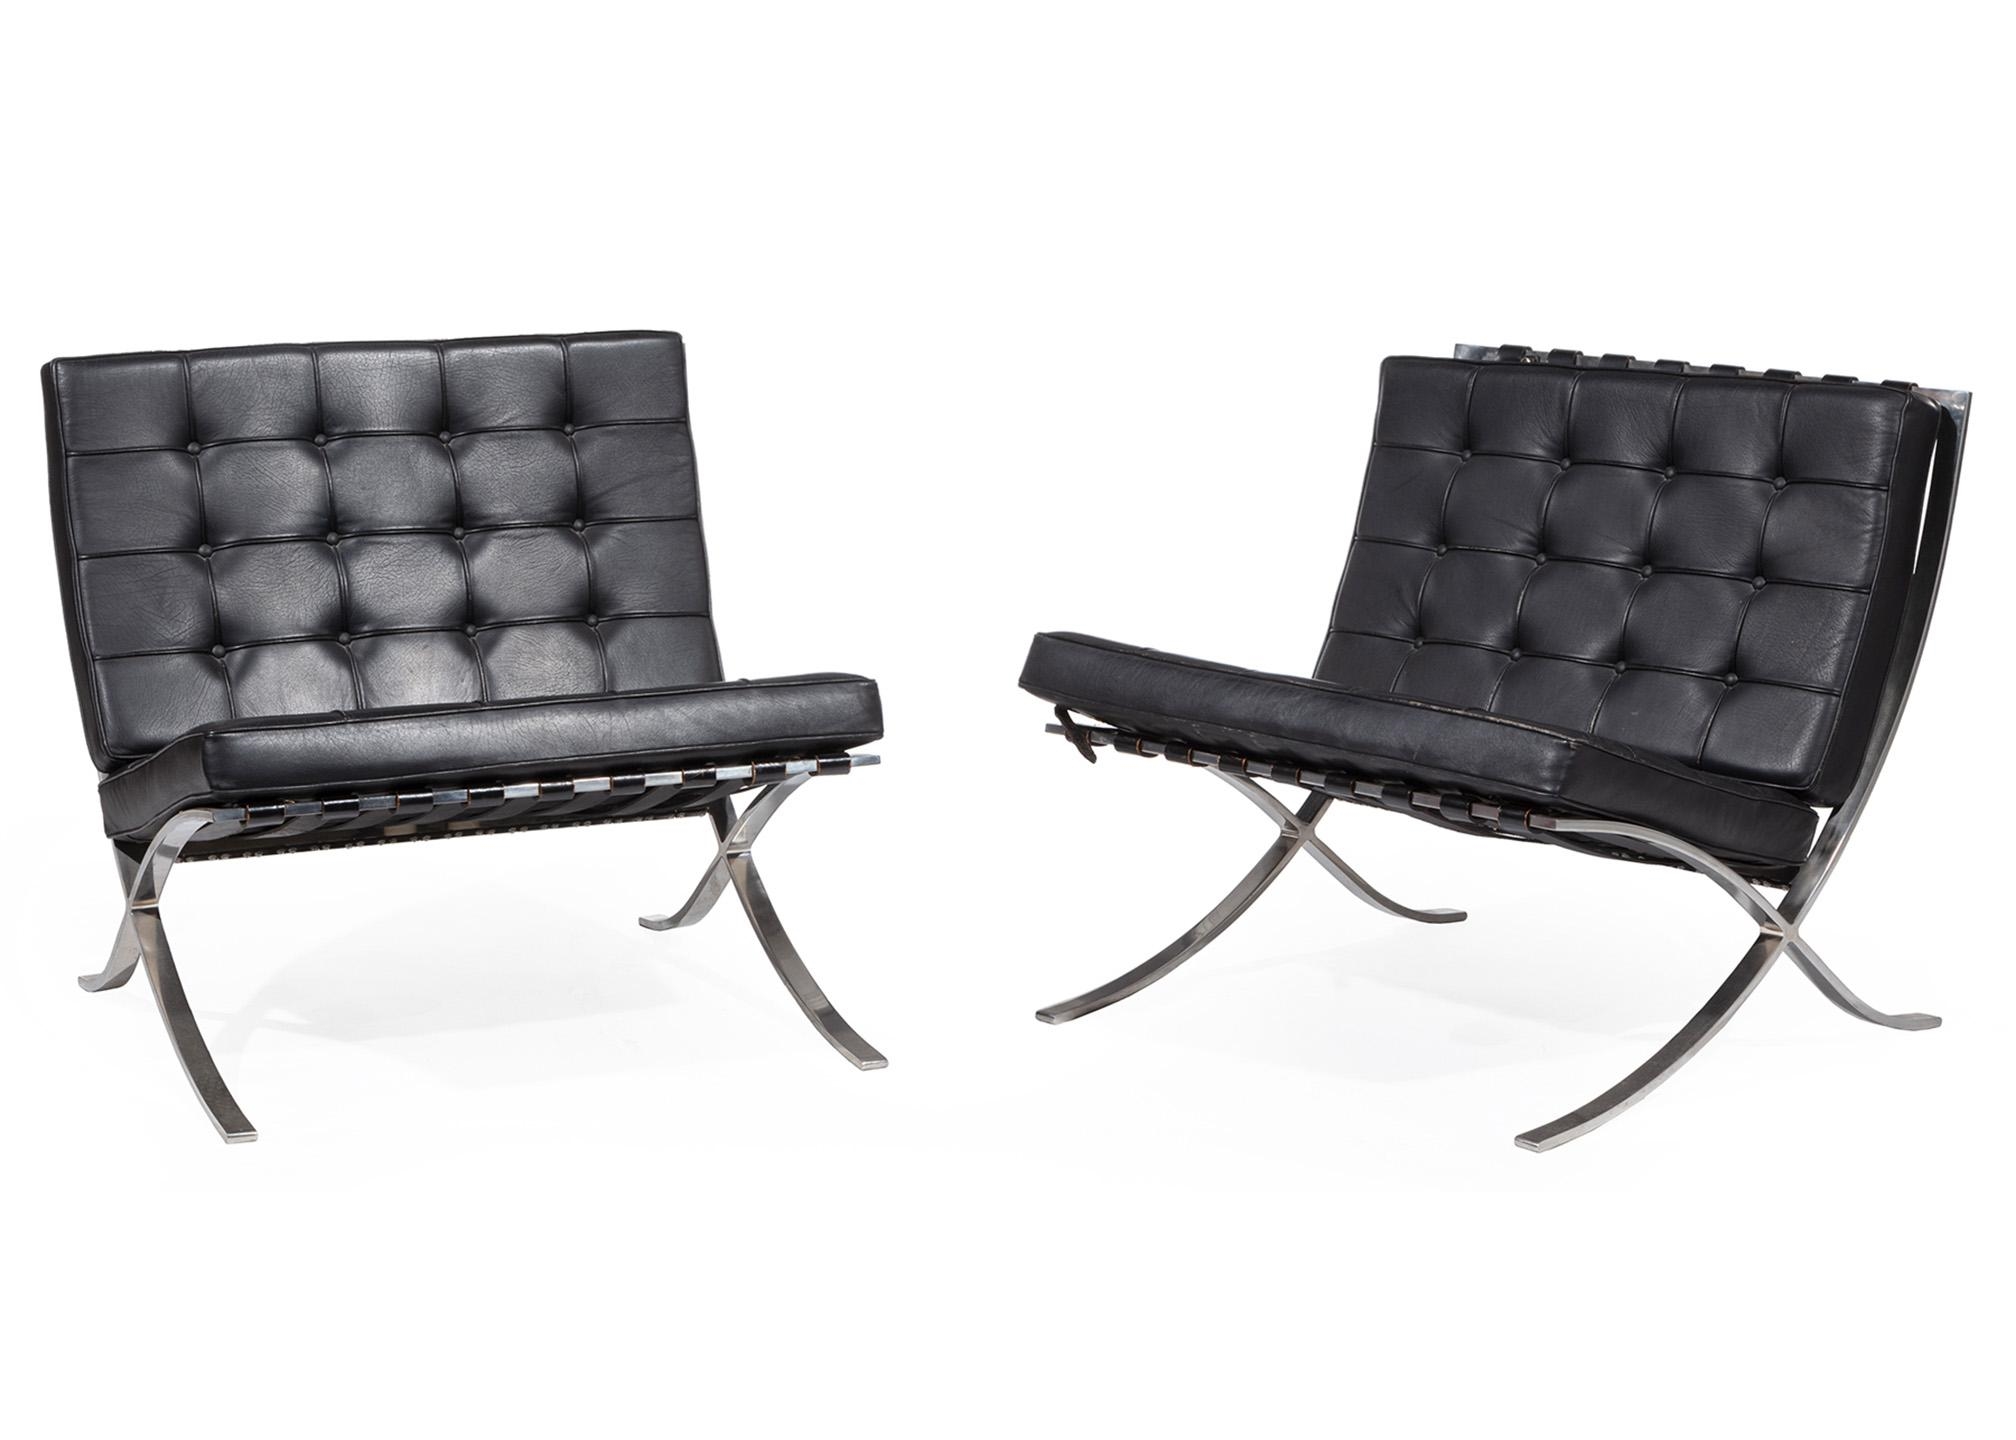 Ludwig Mies van der Rohe for Knoll Chairs by Ludwig Mies van der Rohe, 1972